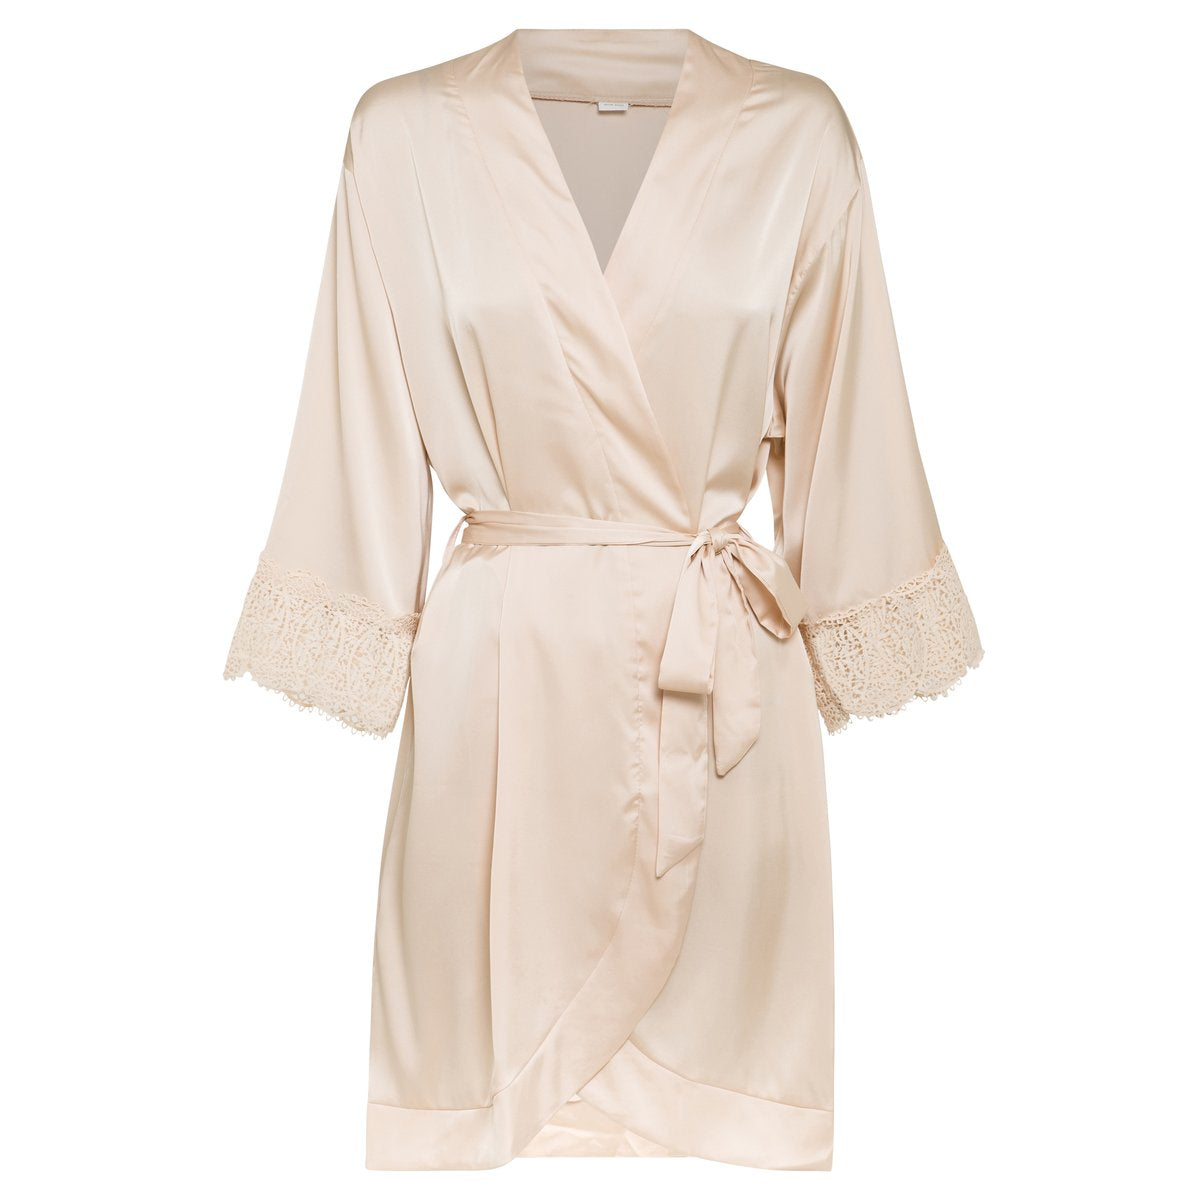 Sarah Collection - 3XL blush Satin robe with lace detail